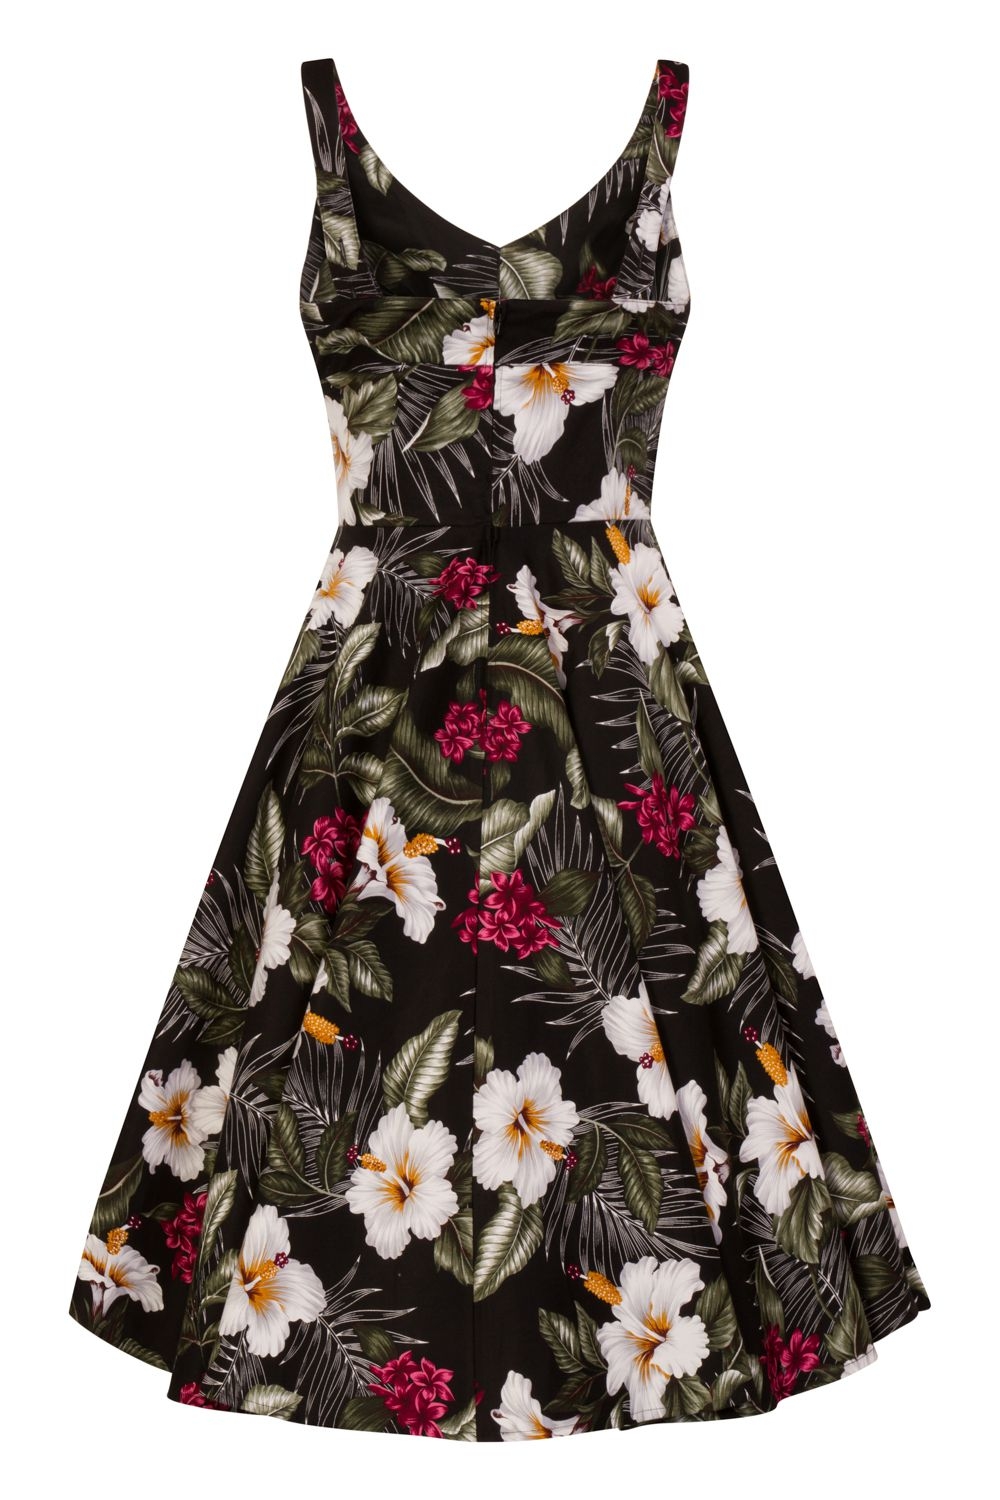 ps4677bbbbb_robe-pin-up-rockabilly-50-s-retro-vintage-swing-tropical-hawaii